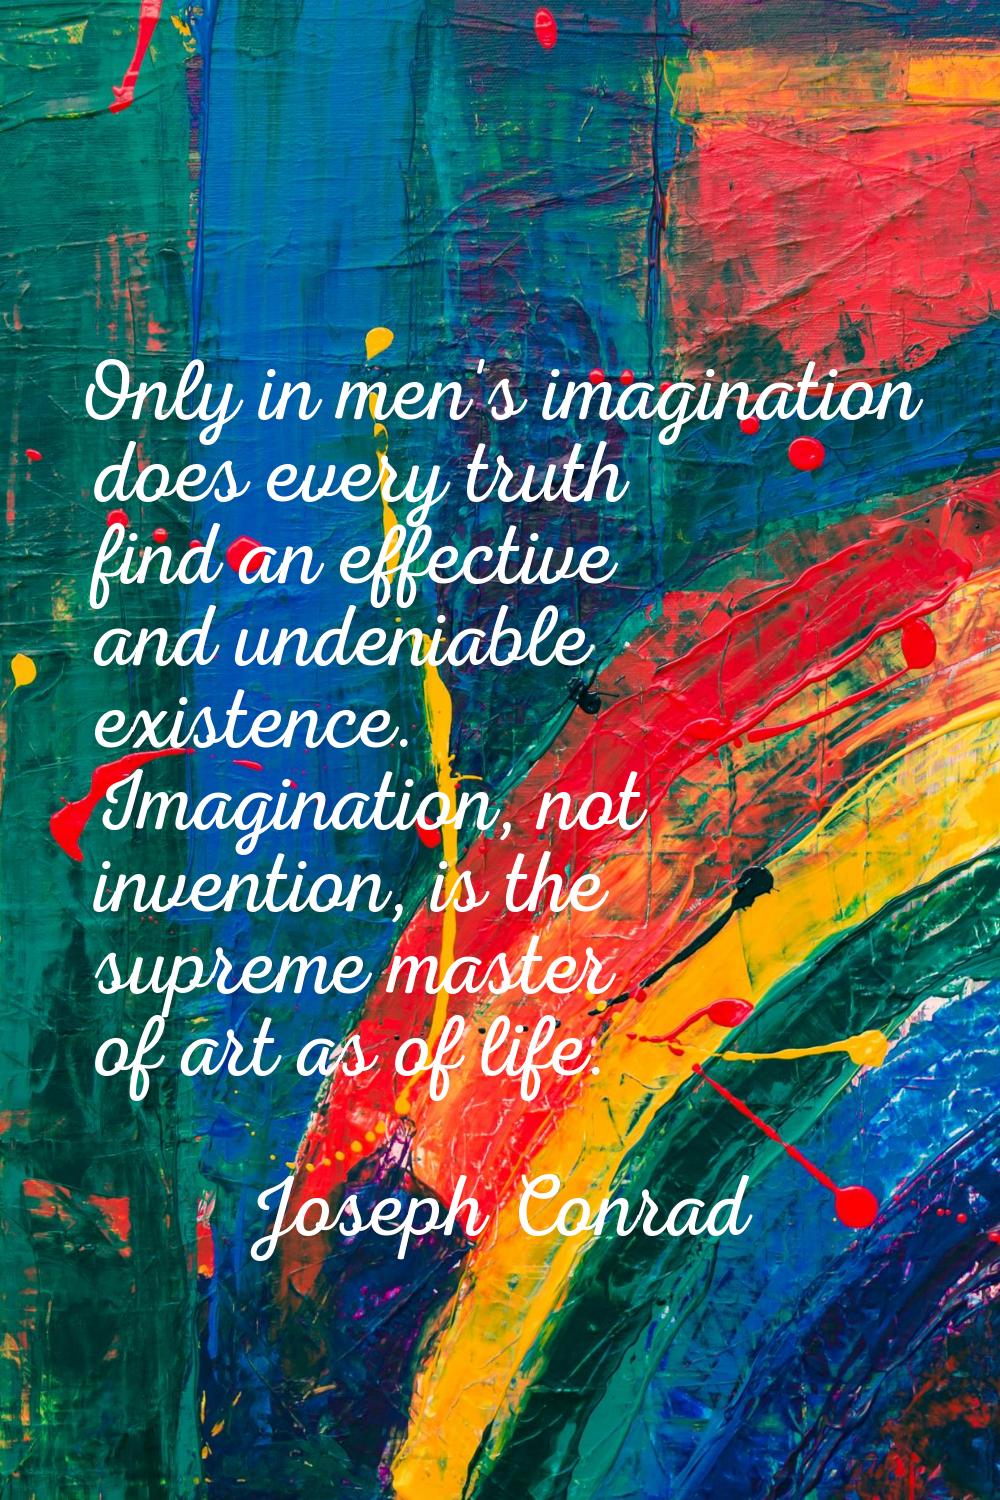 Only in men's imagination does every truth find an effective and undeniable existence. Imagination,